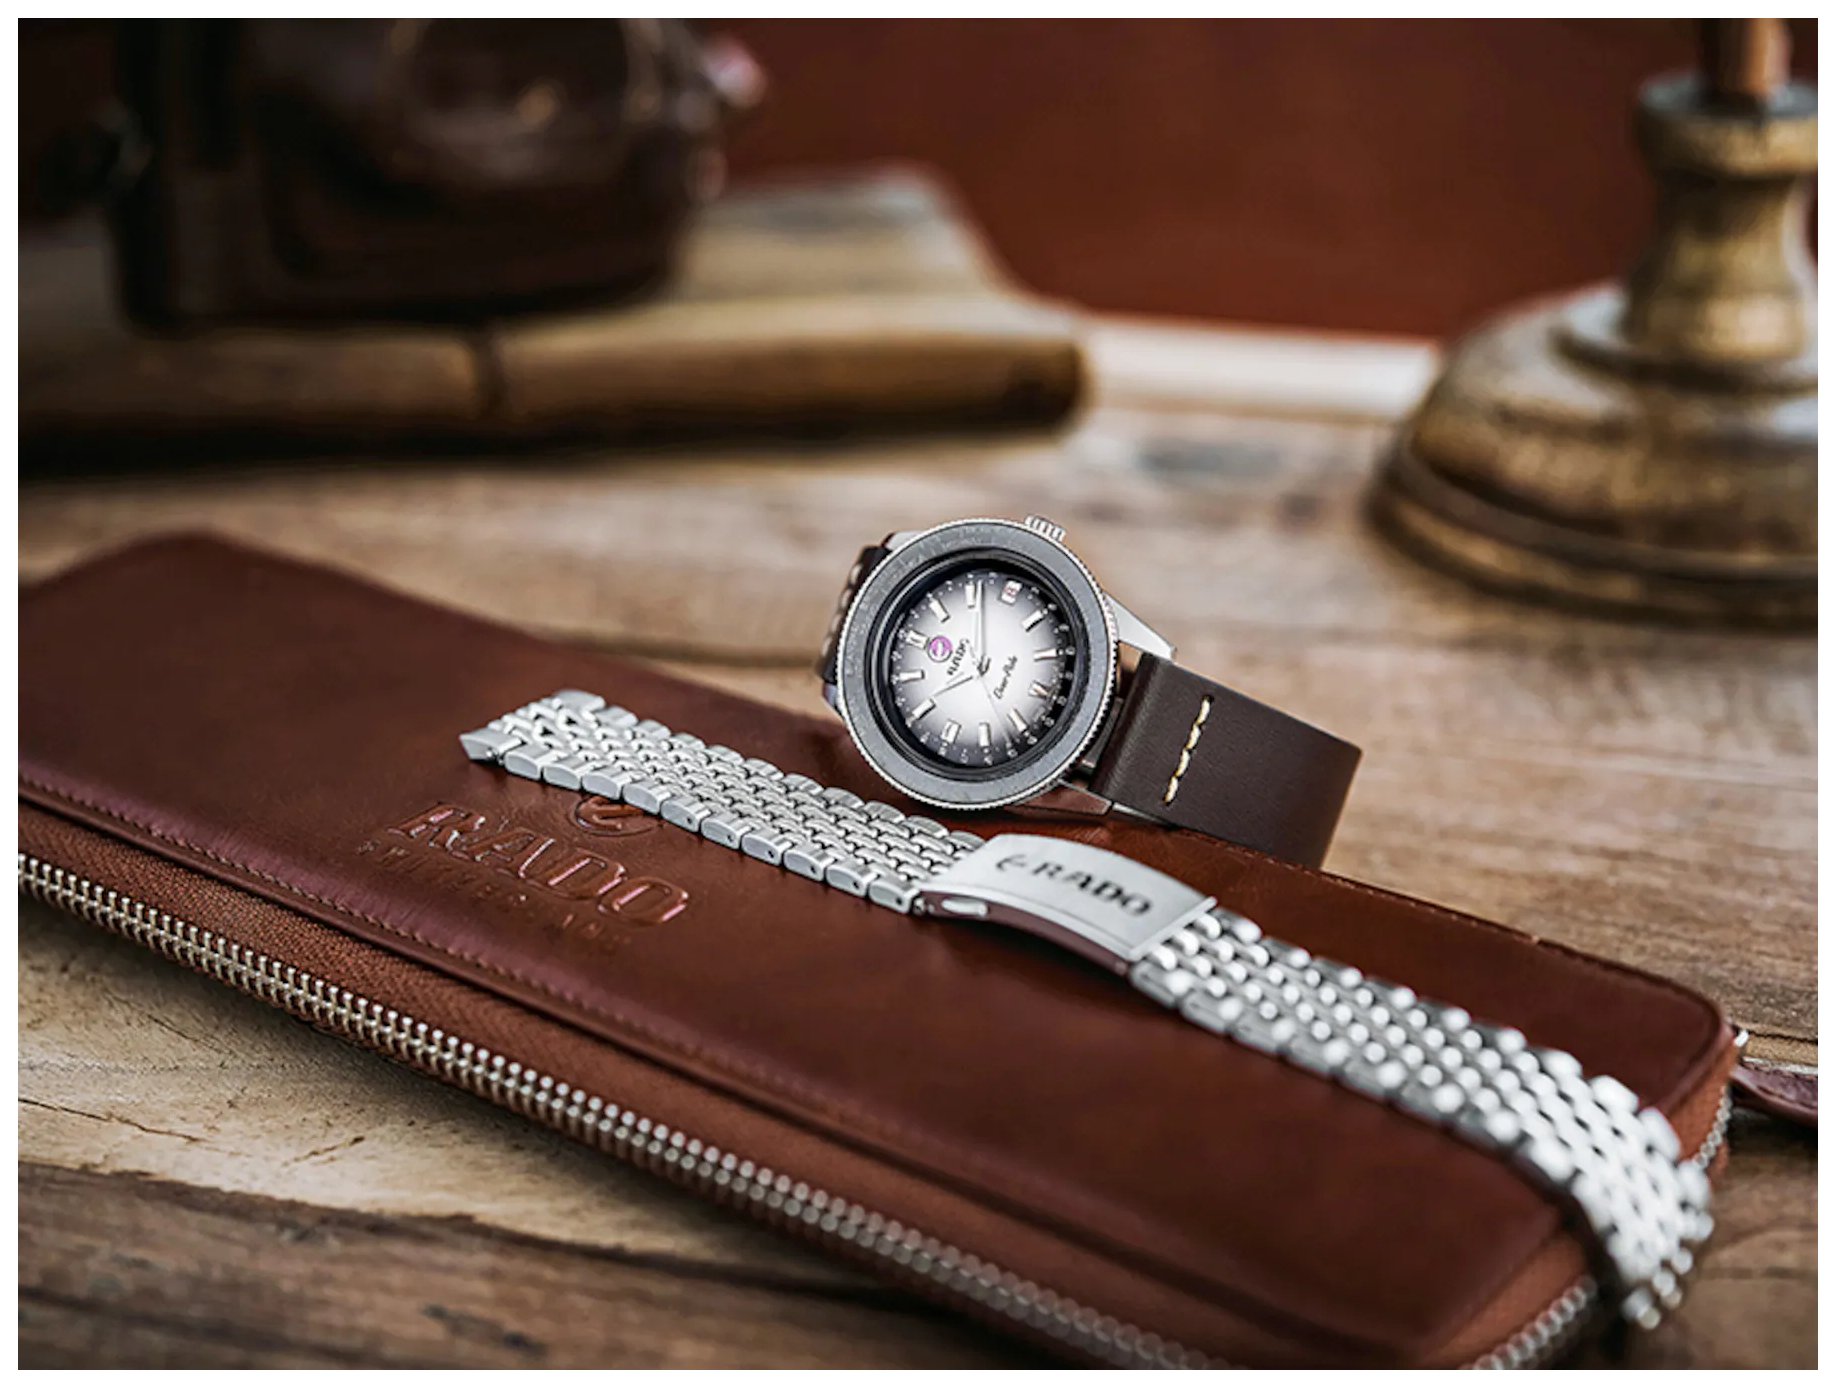 Rado's Limited Edition Captain Cook Over-Pole